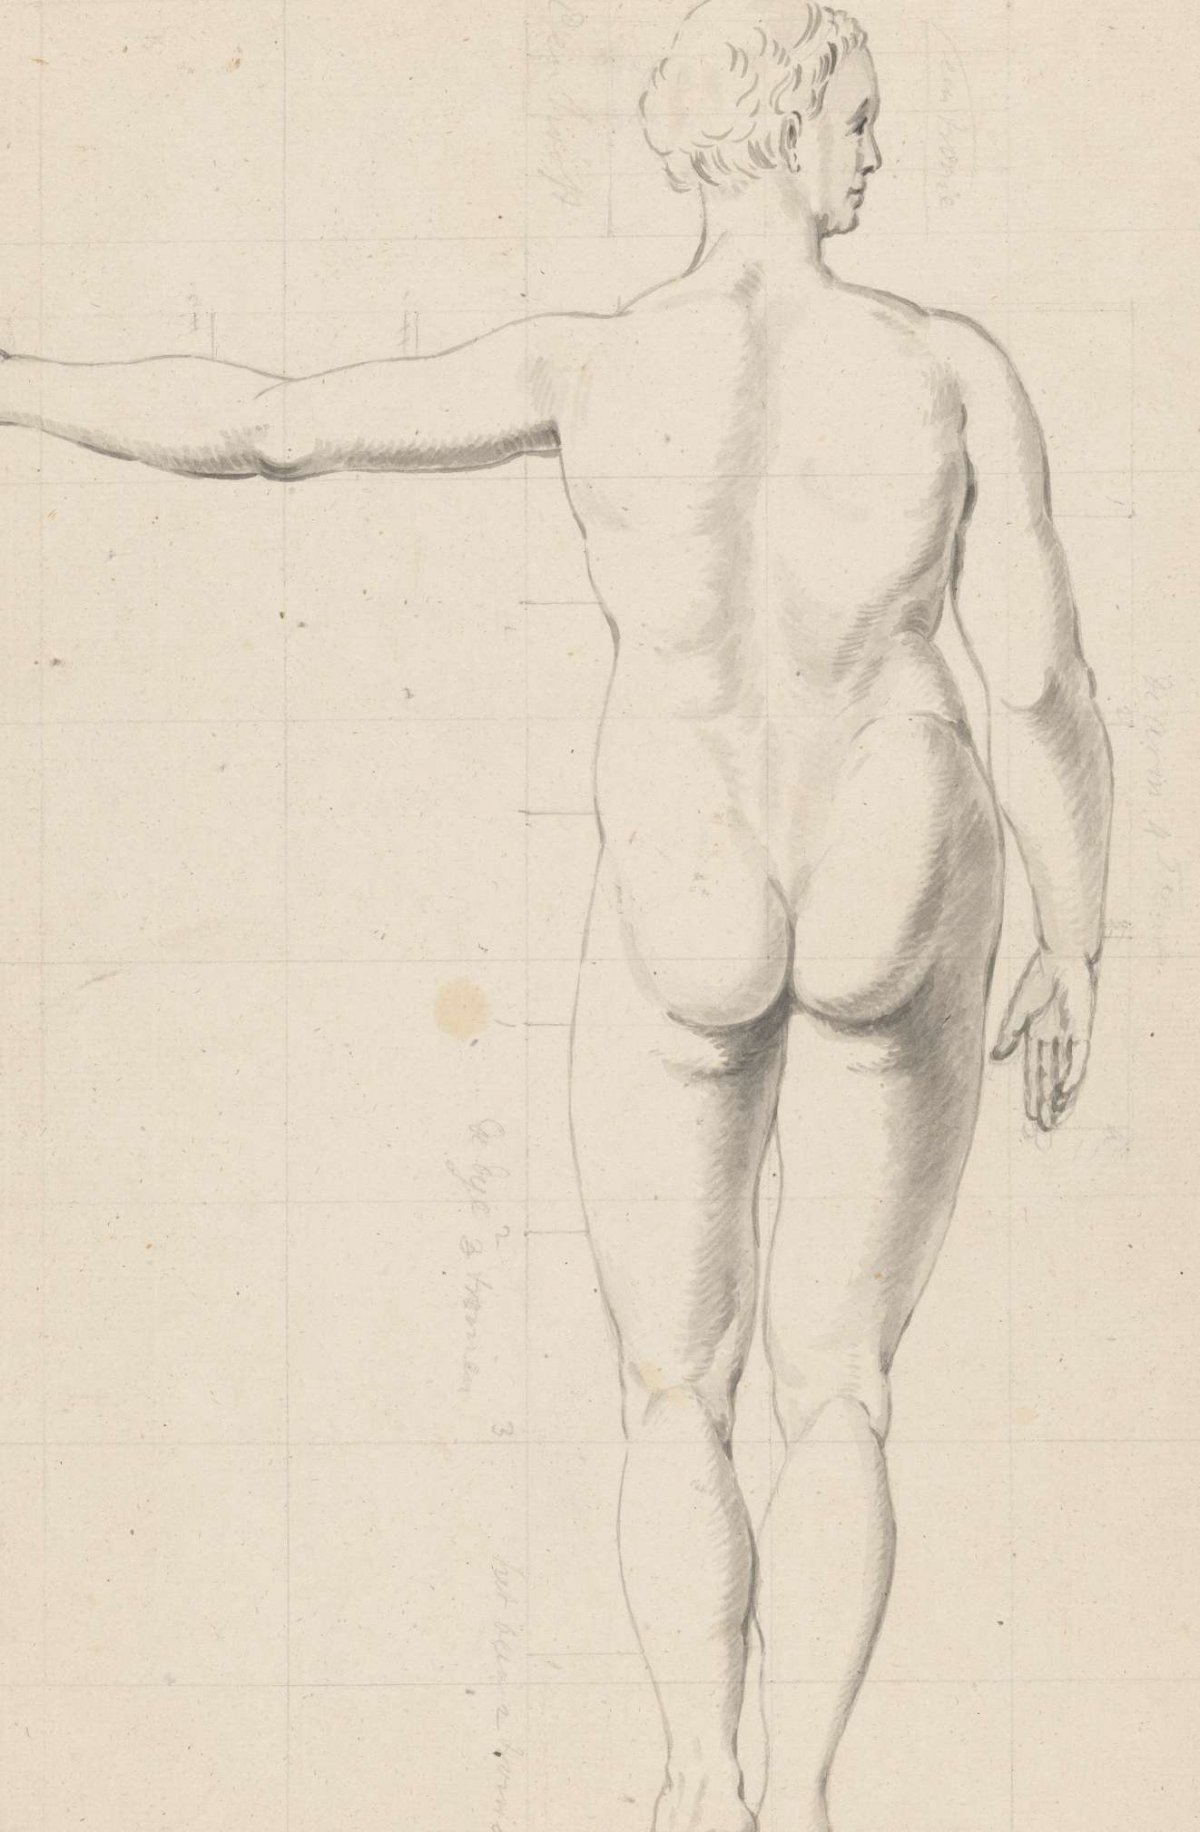 Nude studies of woman and man, seen from the back, Jan Brandes, 1787 - 1808